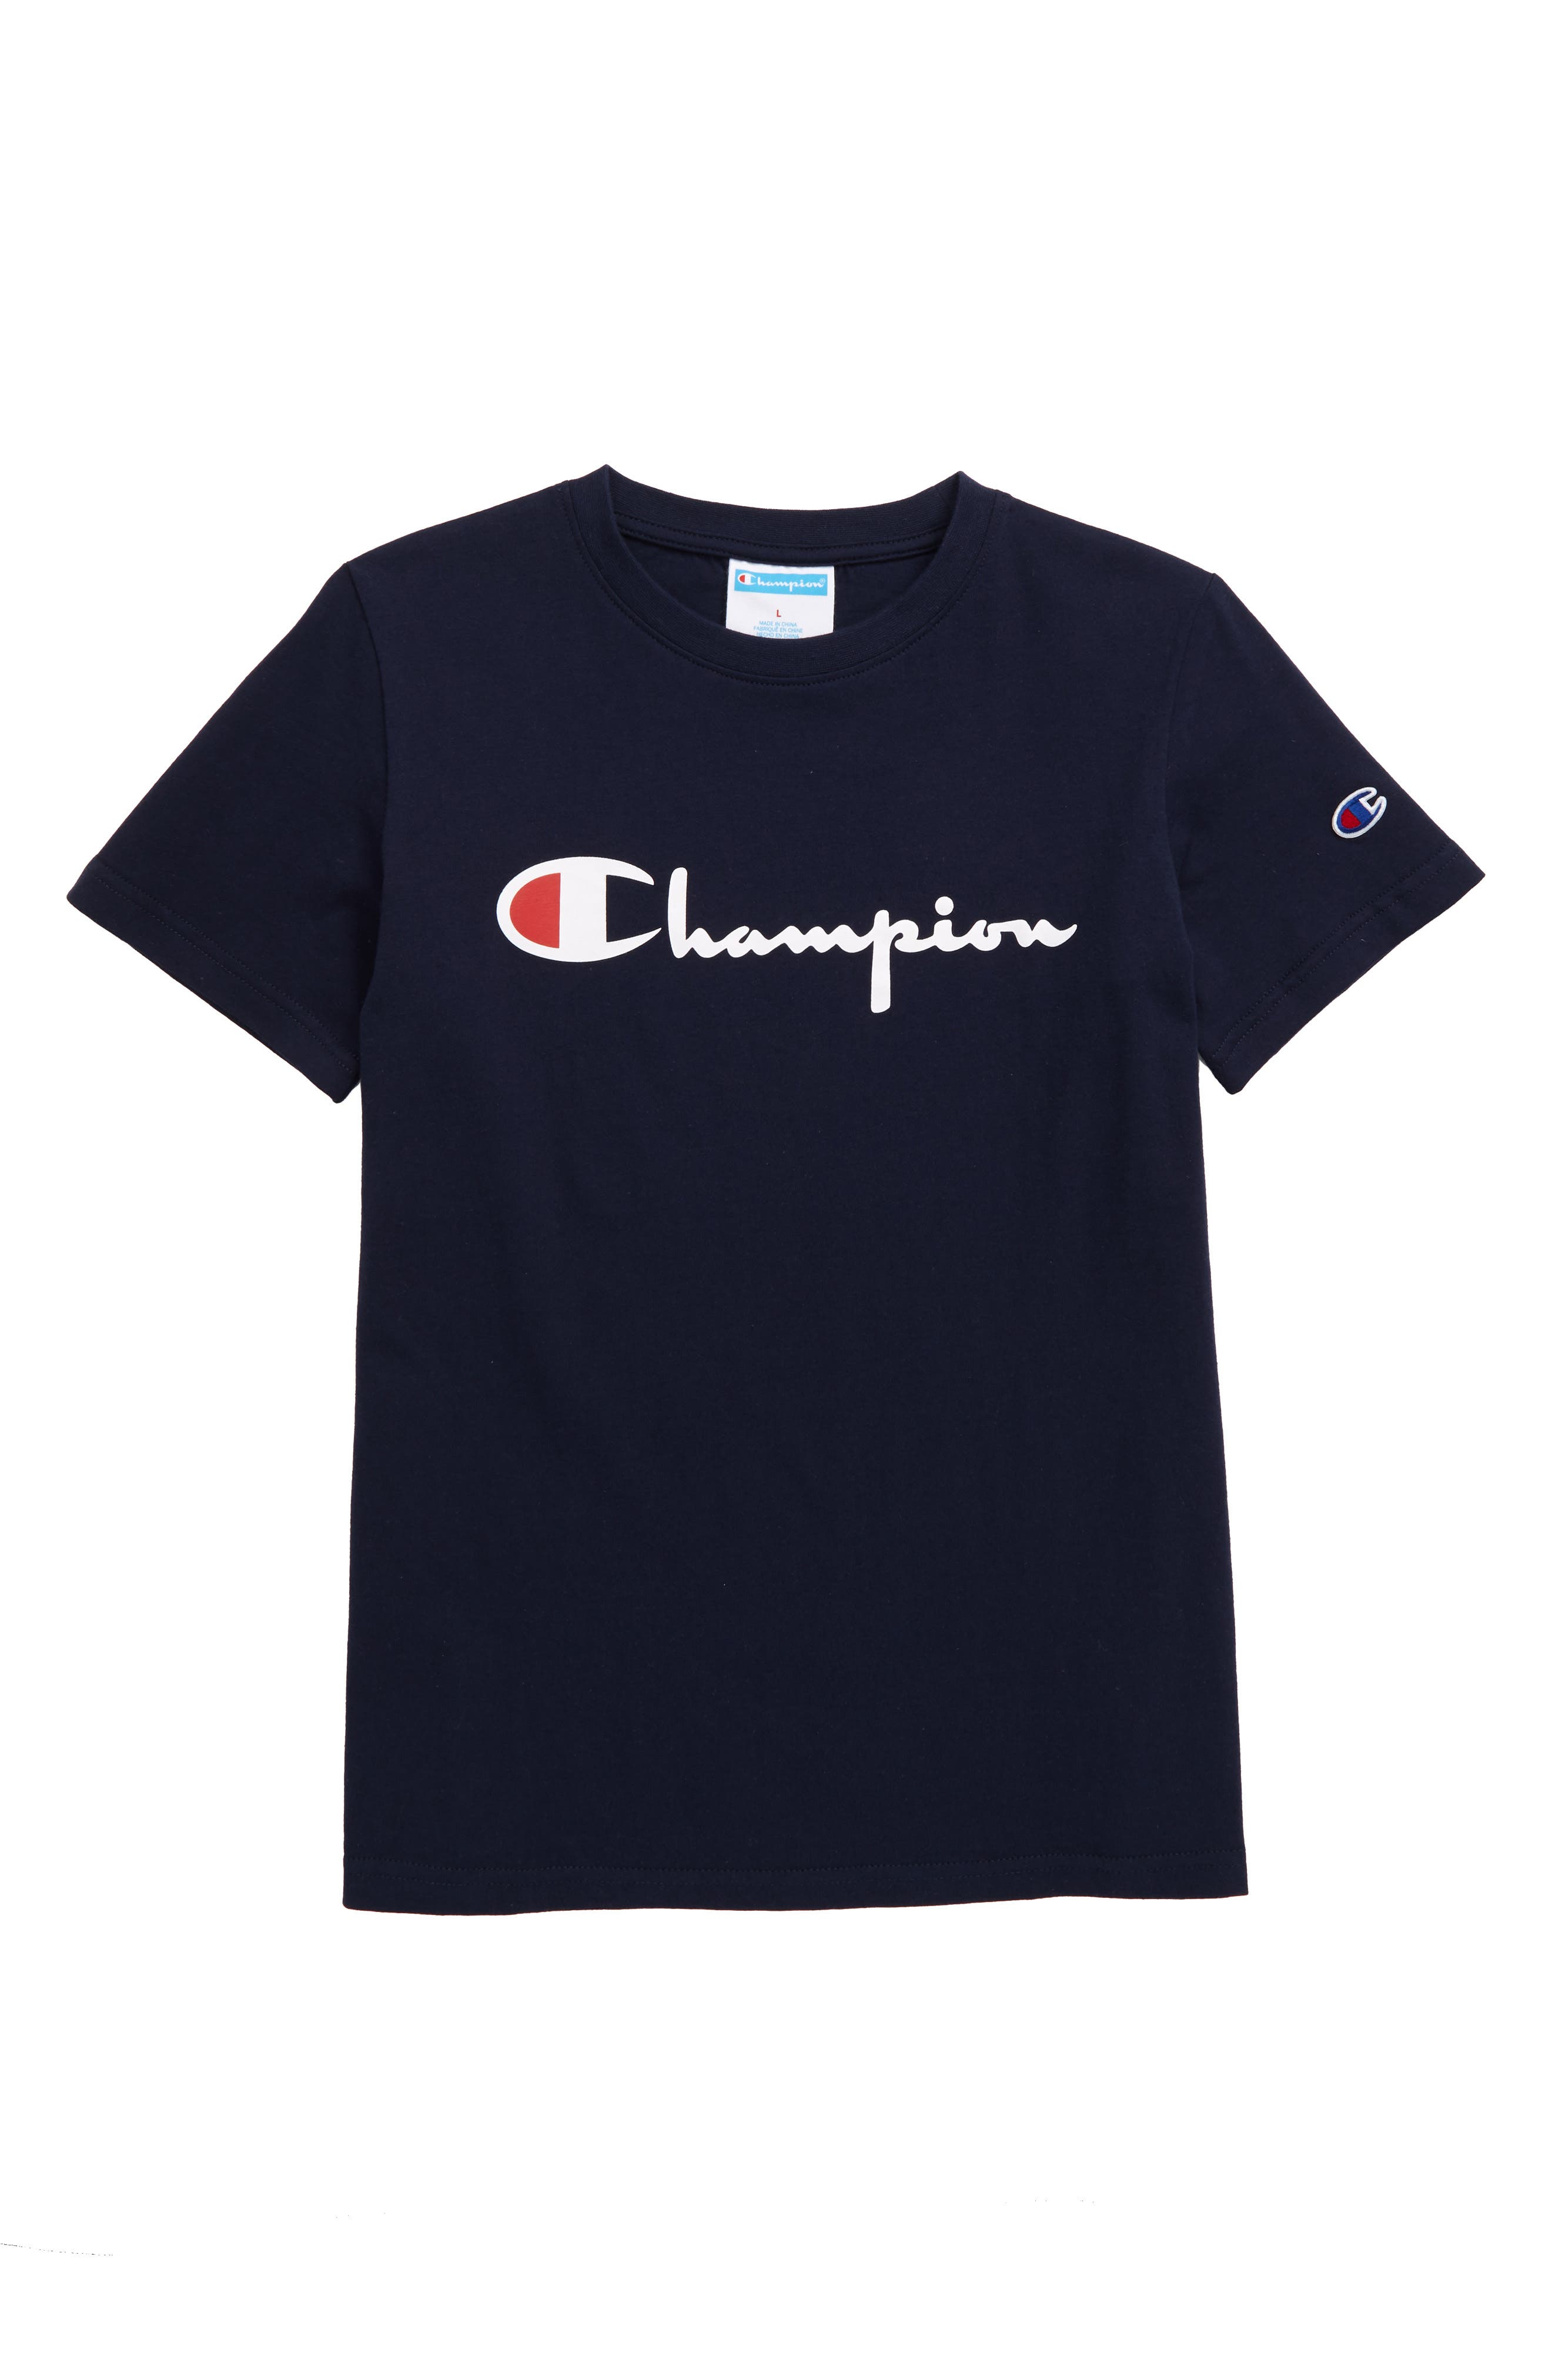 champion outfits for infants